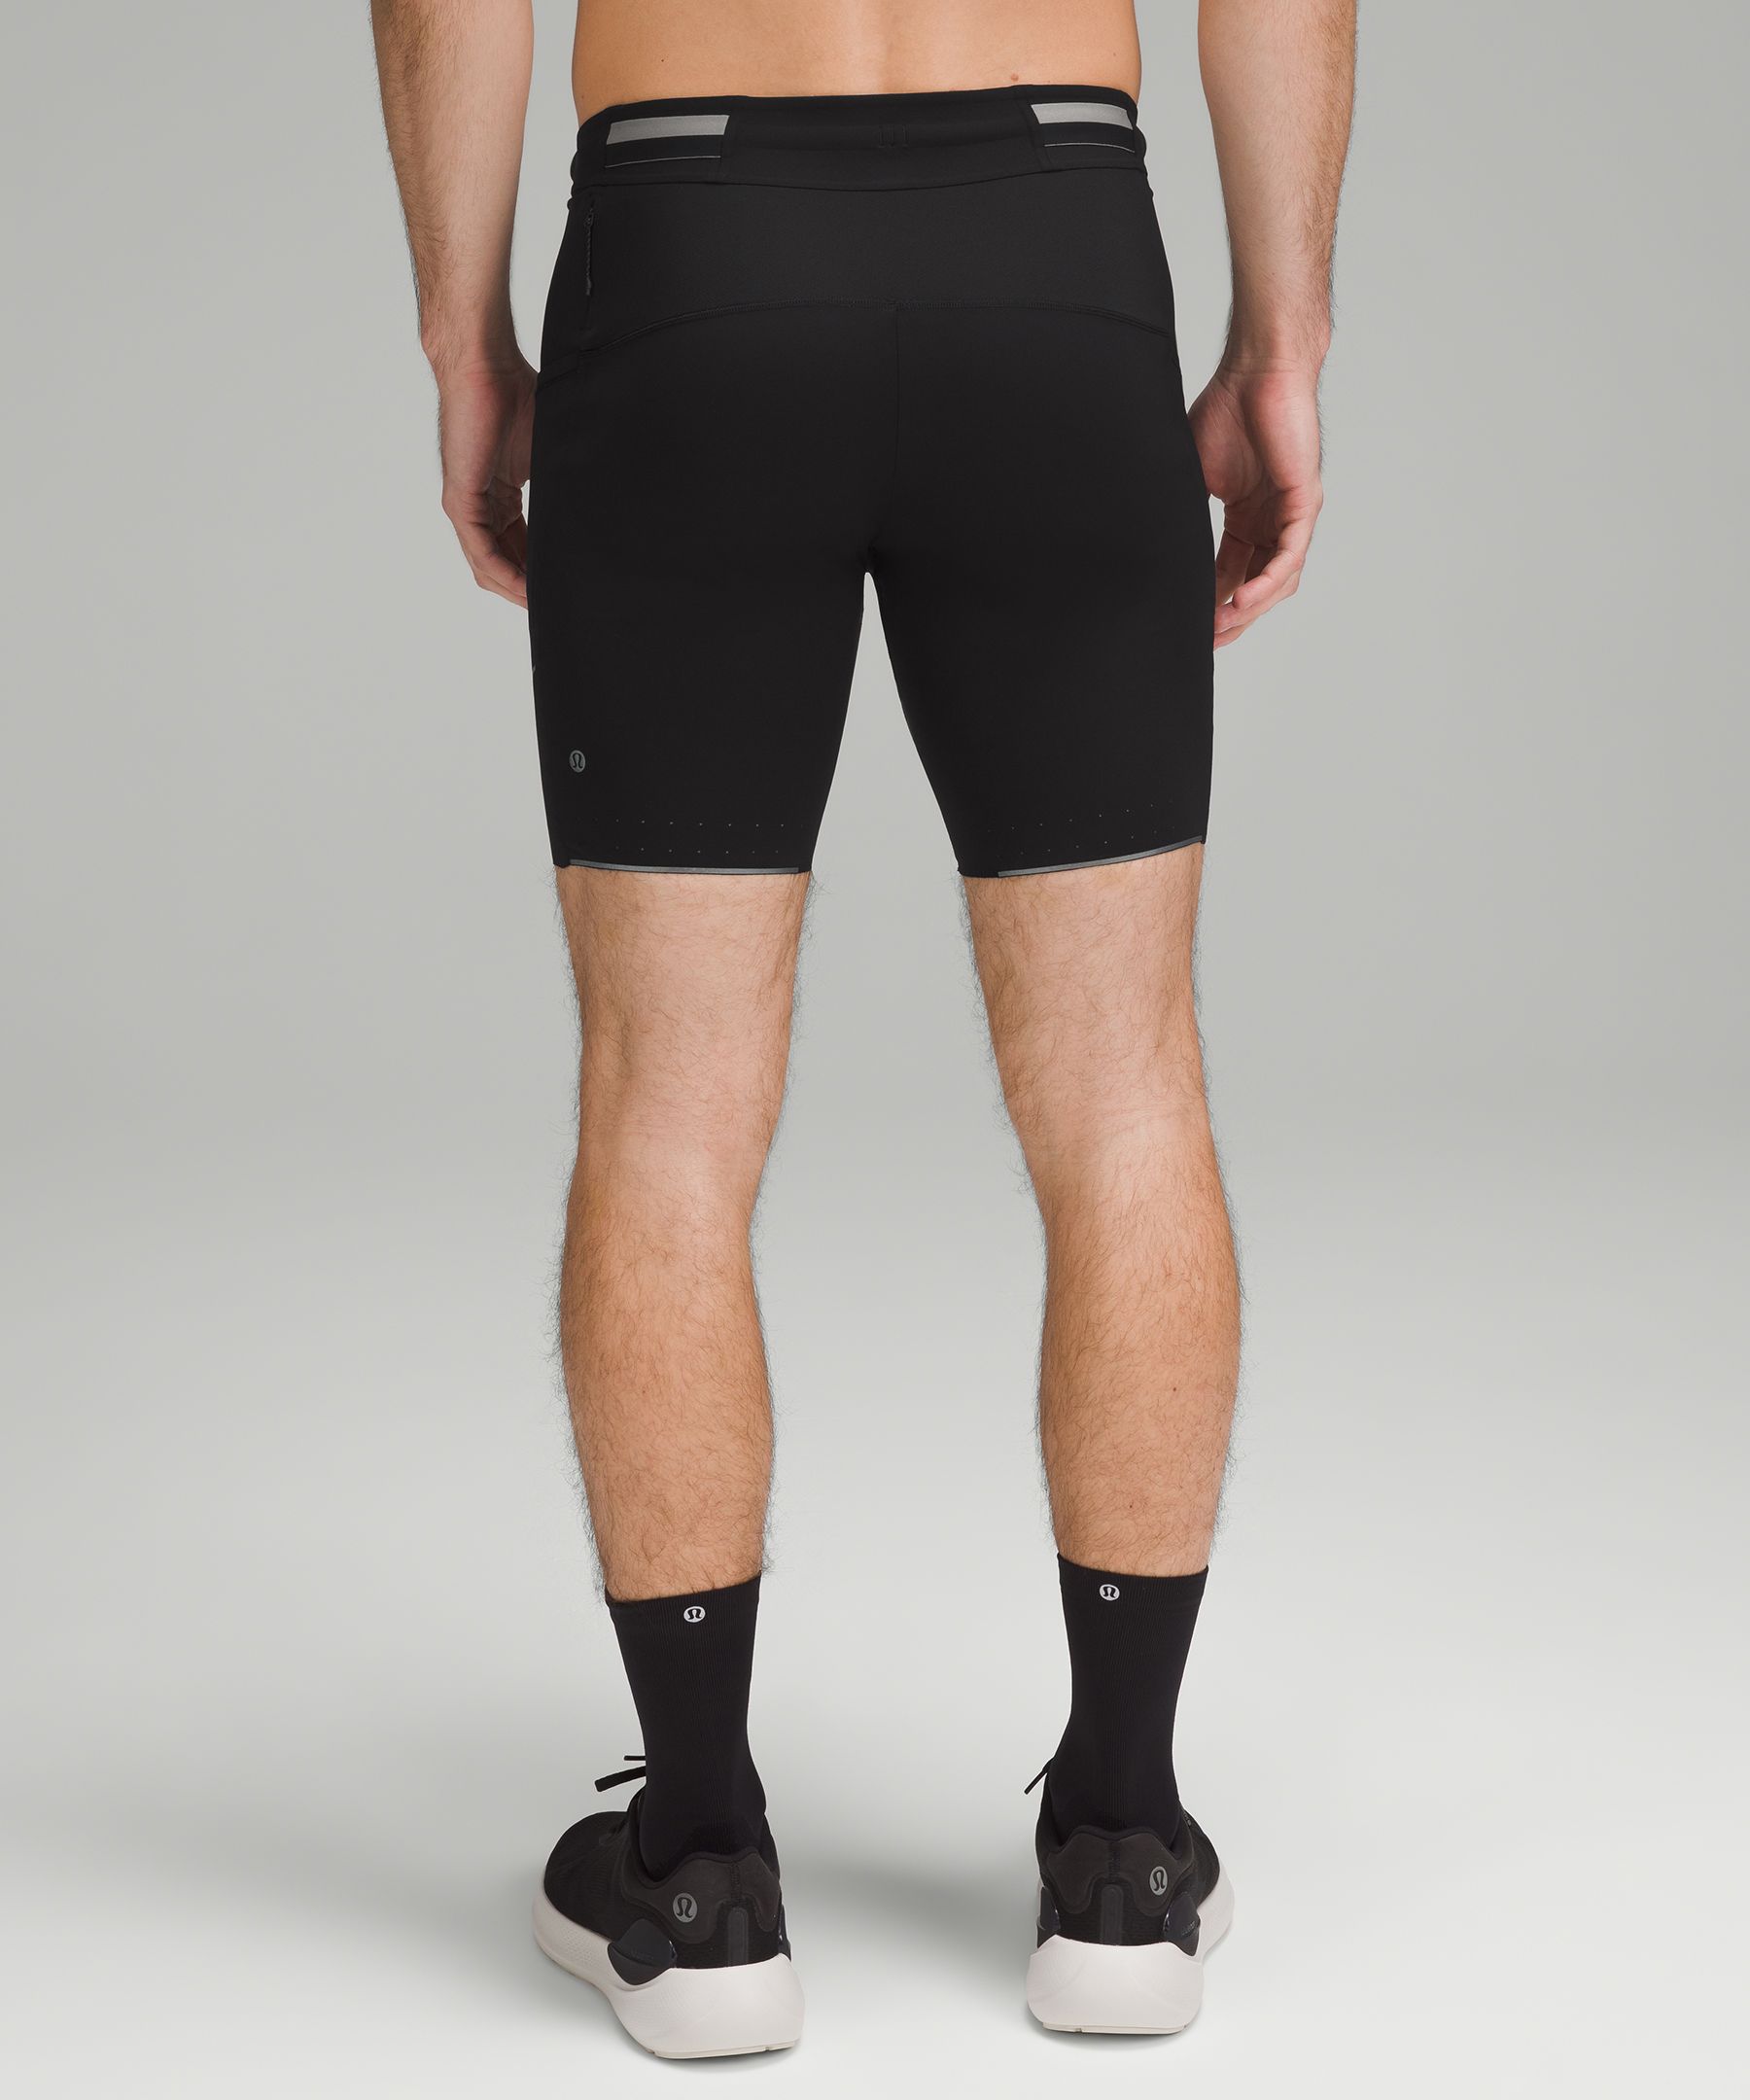 Fast and Free Half Tight 8, Men's Shorts